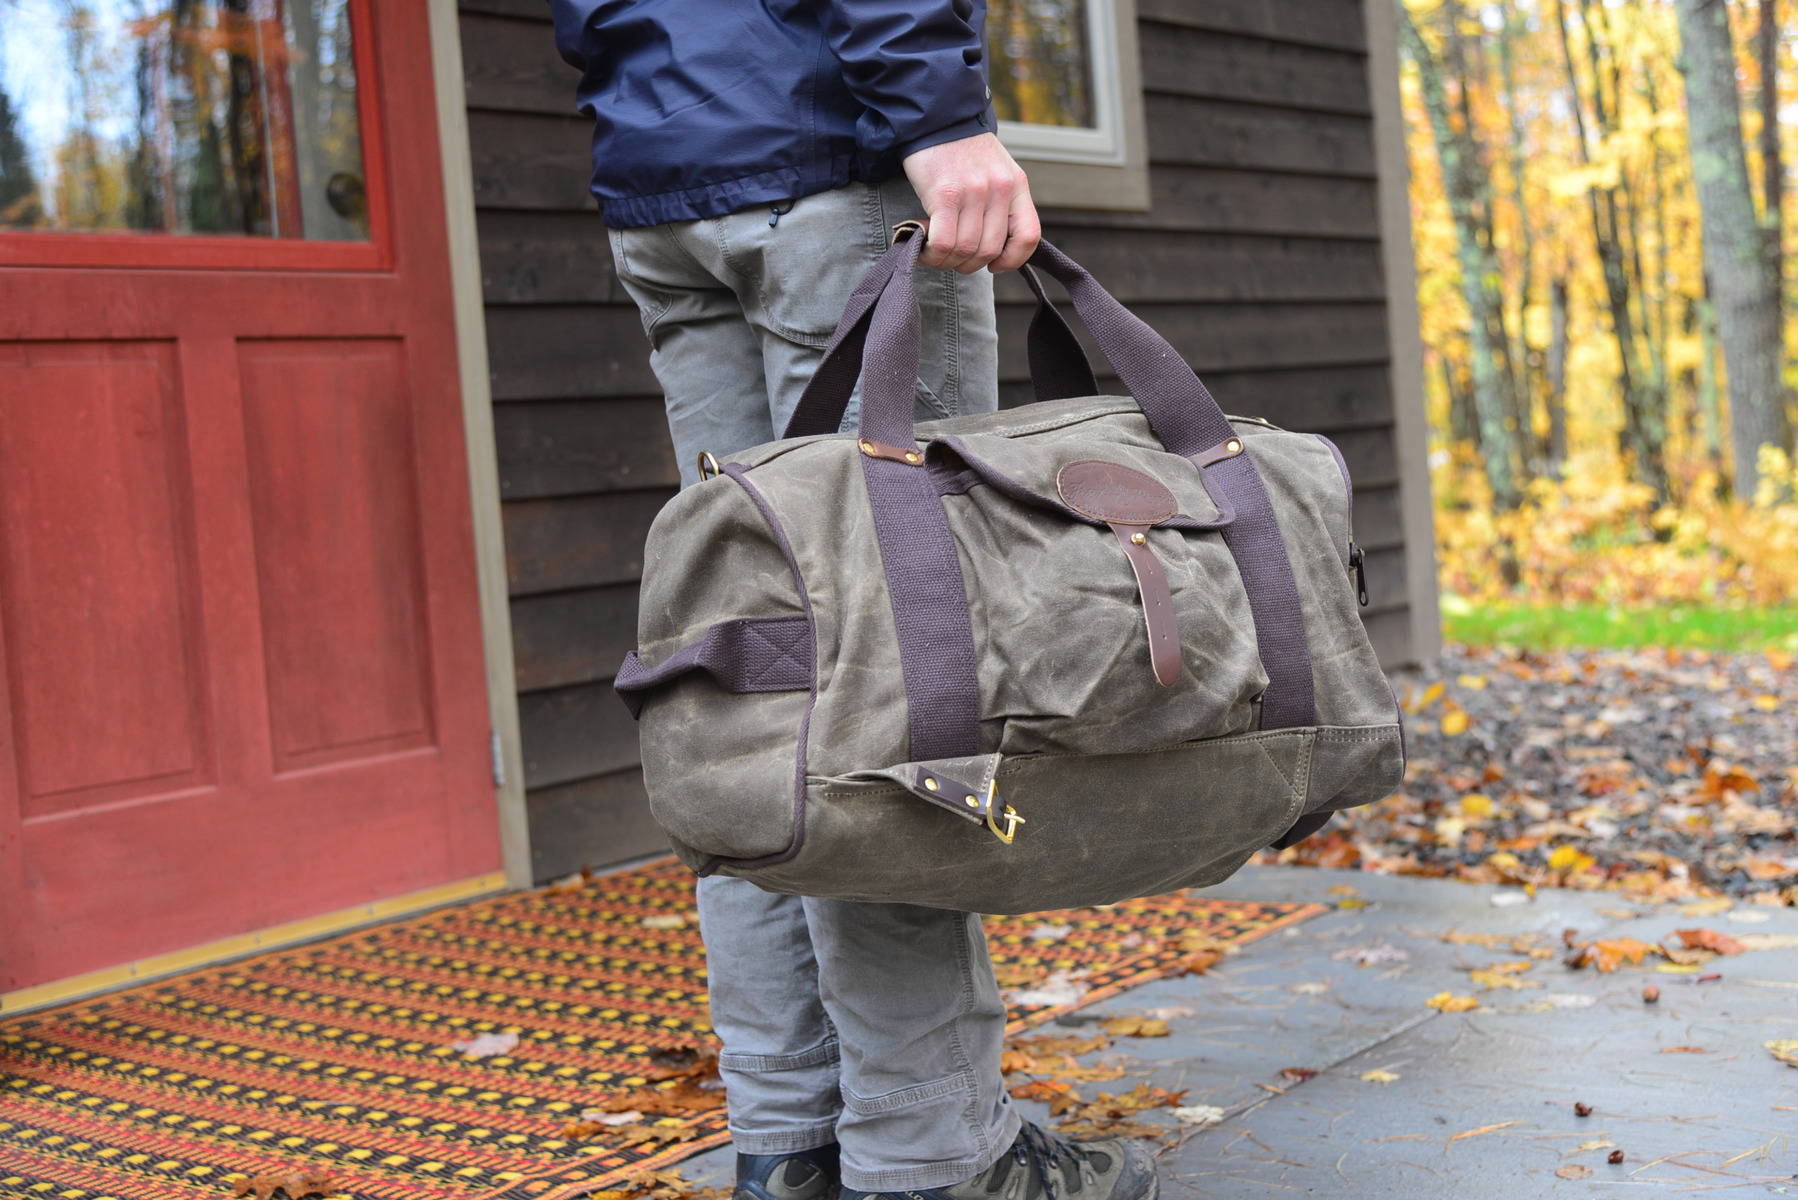 Explorer Duffel ESB | Luggage | Frost River | Made in USA